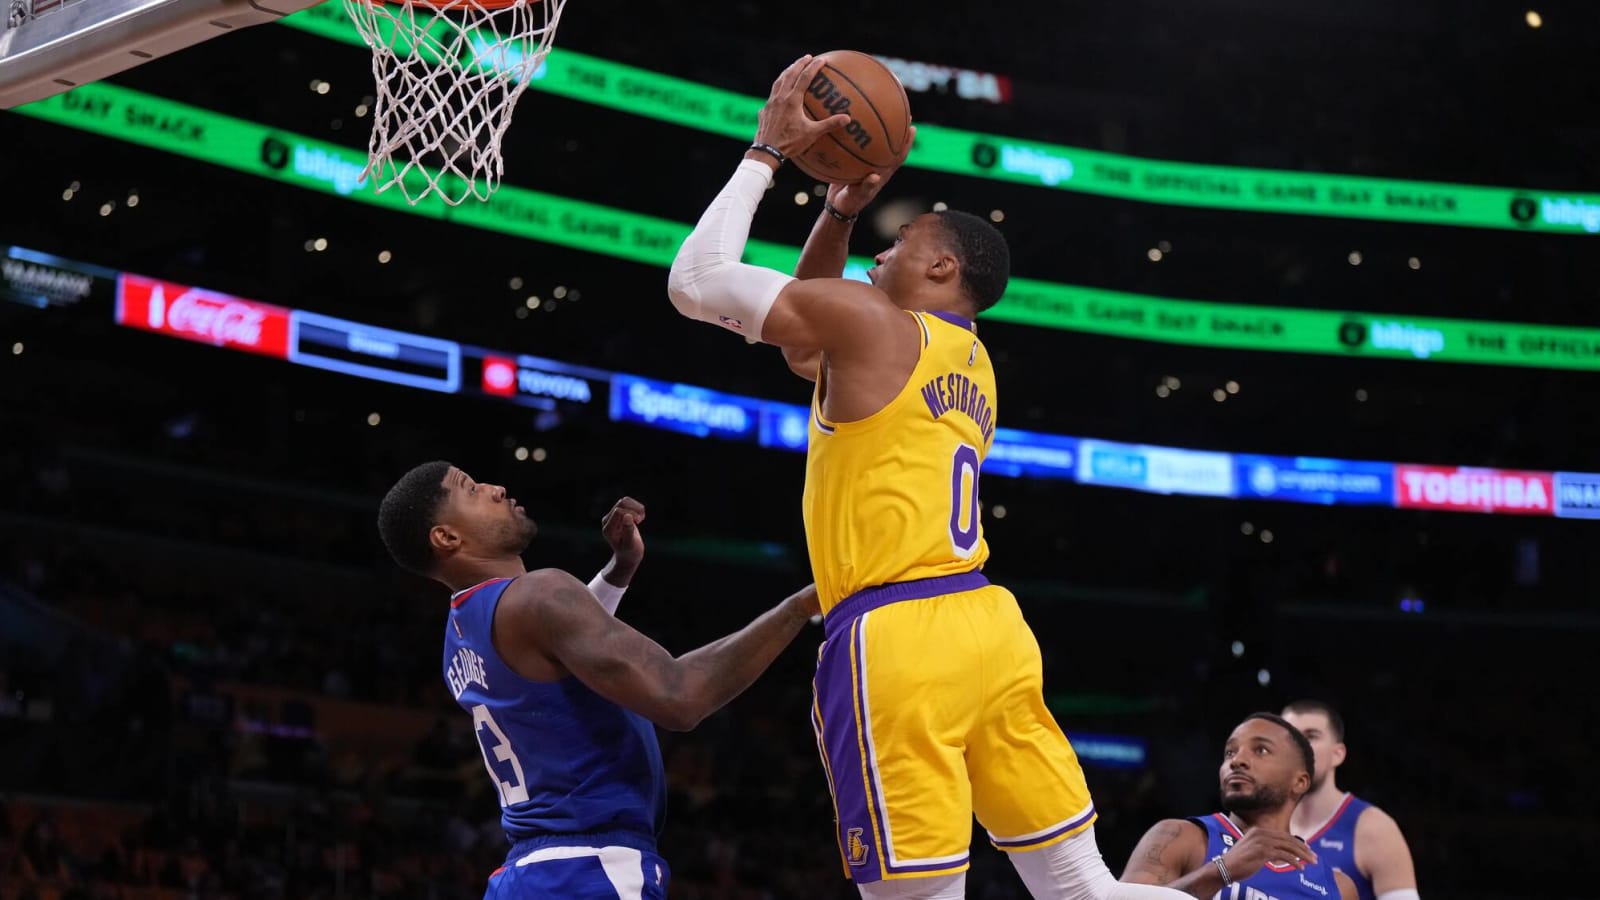 Lakers fans roast Russell Westbrook as he attempts to shoot a